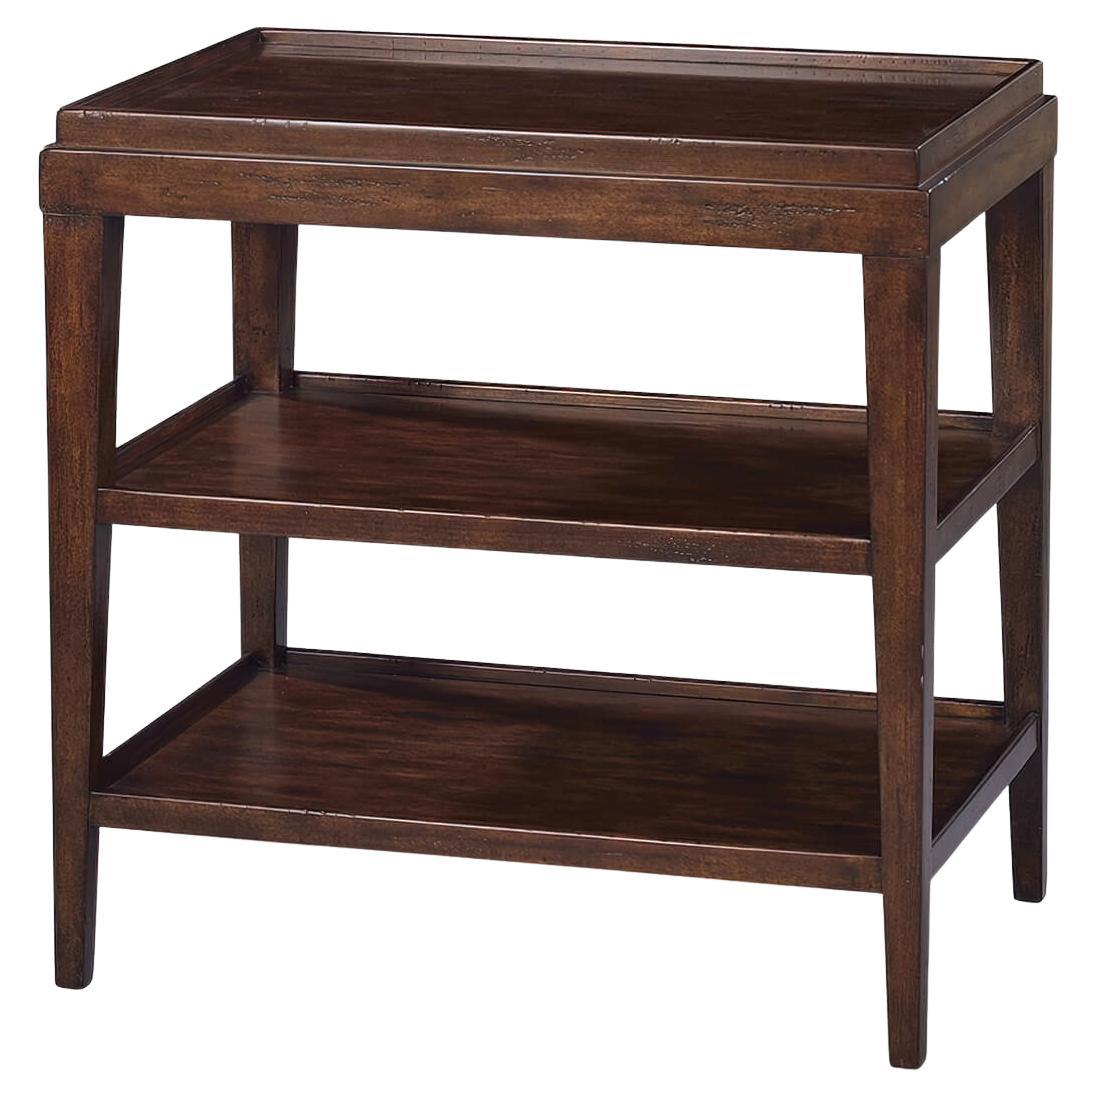 Classic Three-Tier Side Table, Rustic For Sale